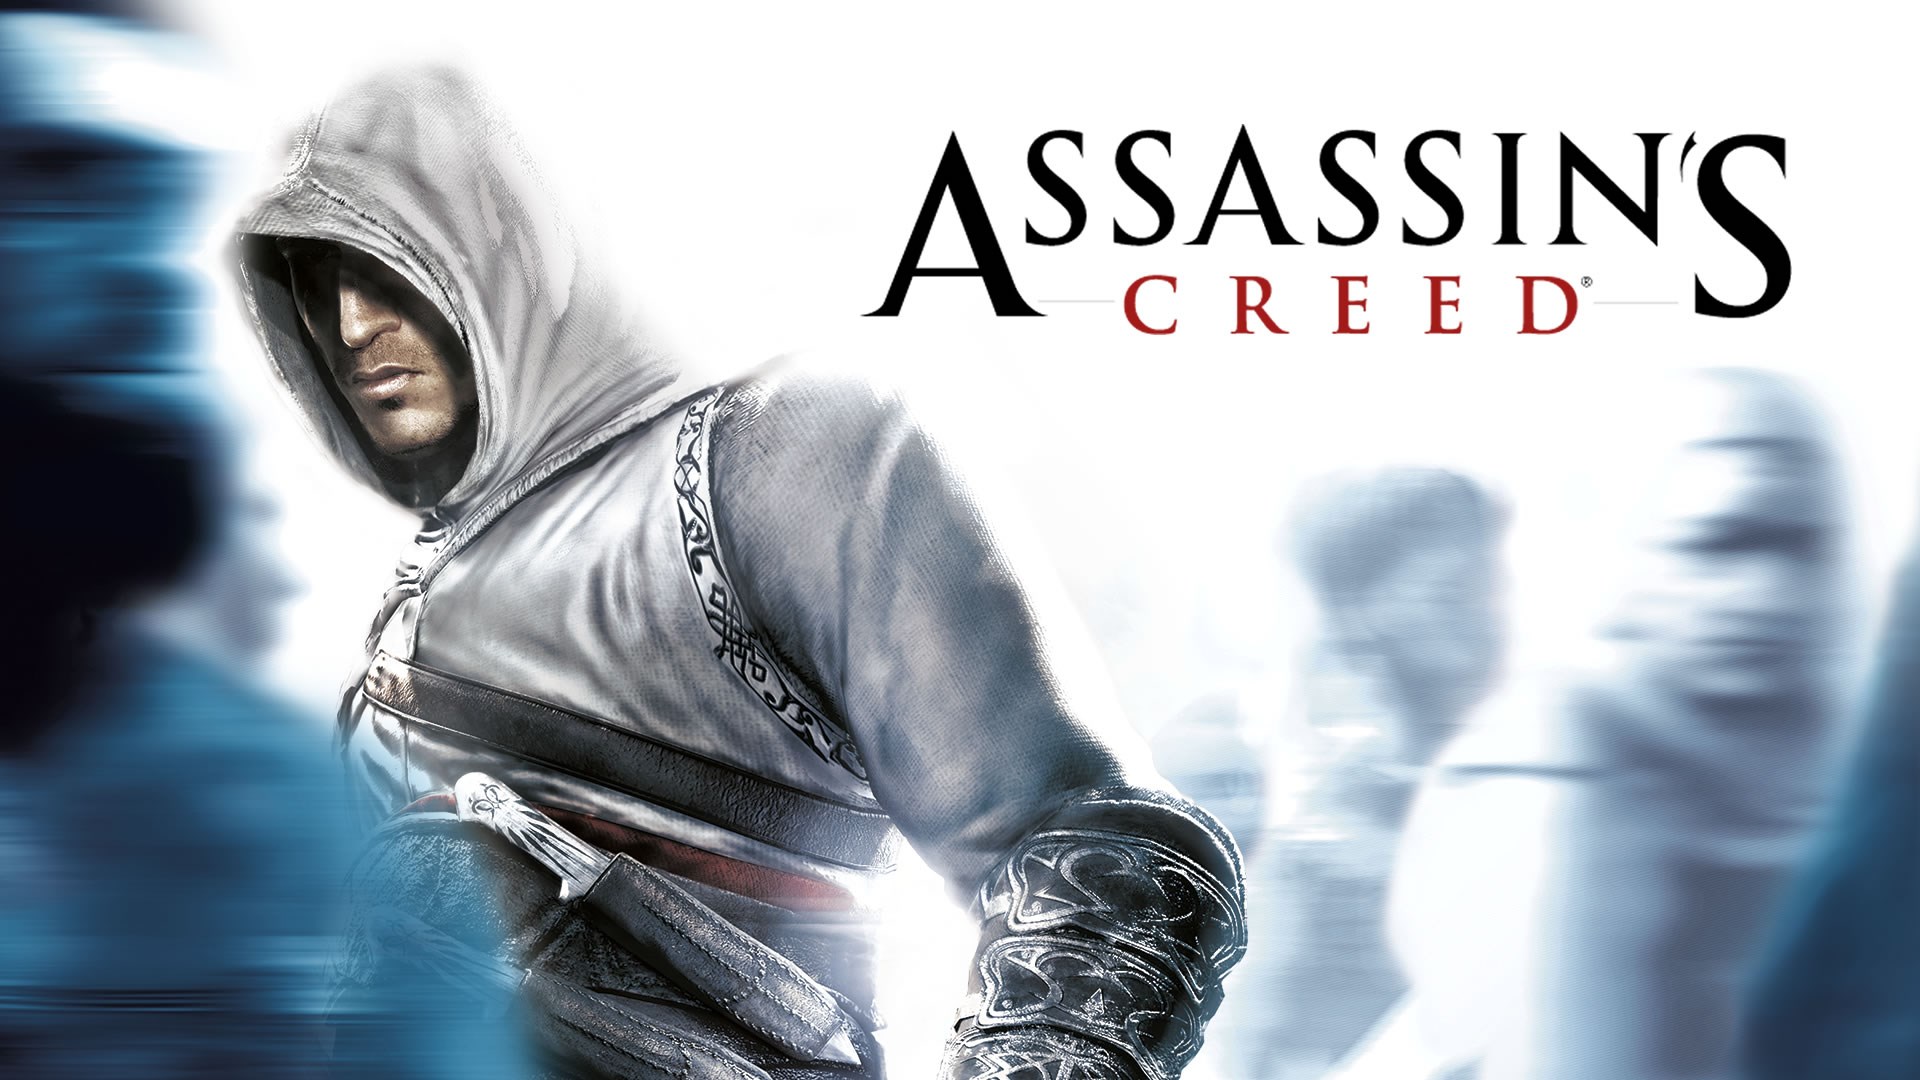 Top 5 - Assassin’s Creed